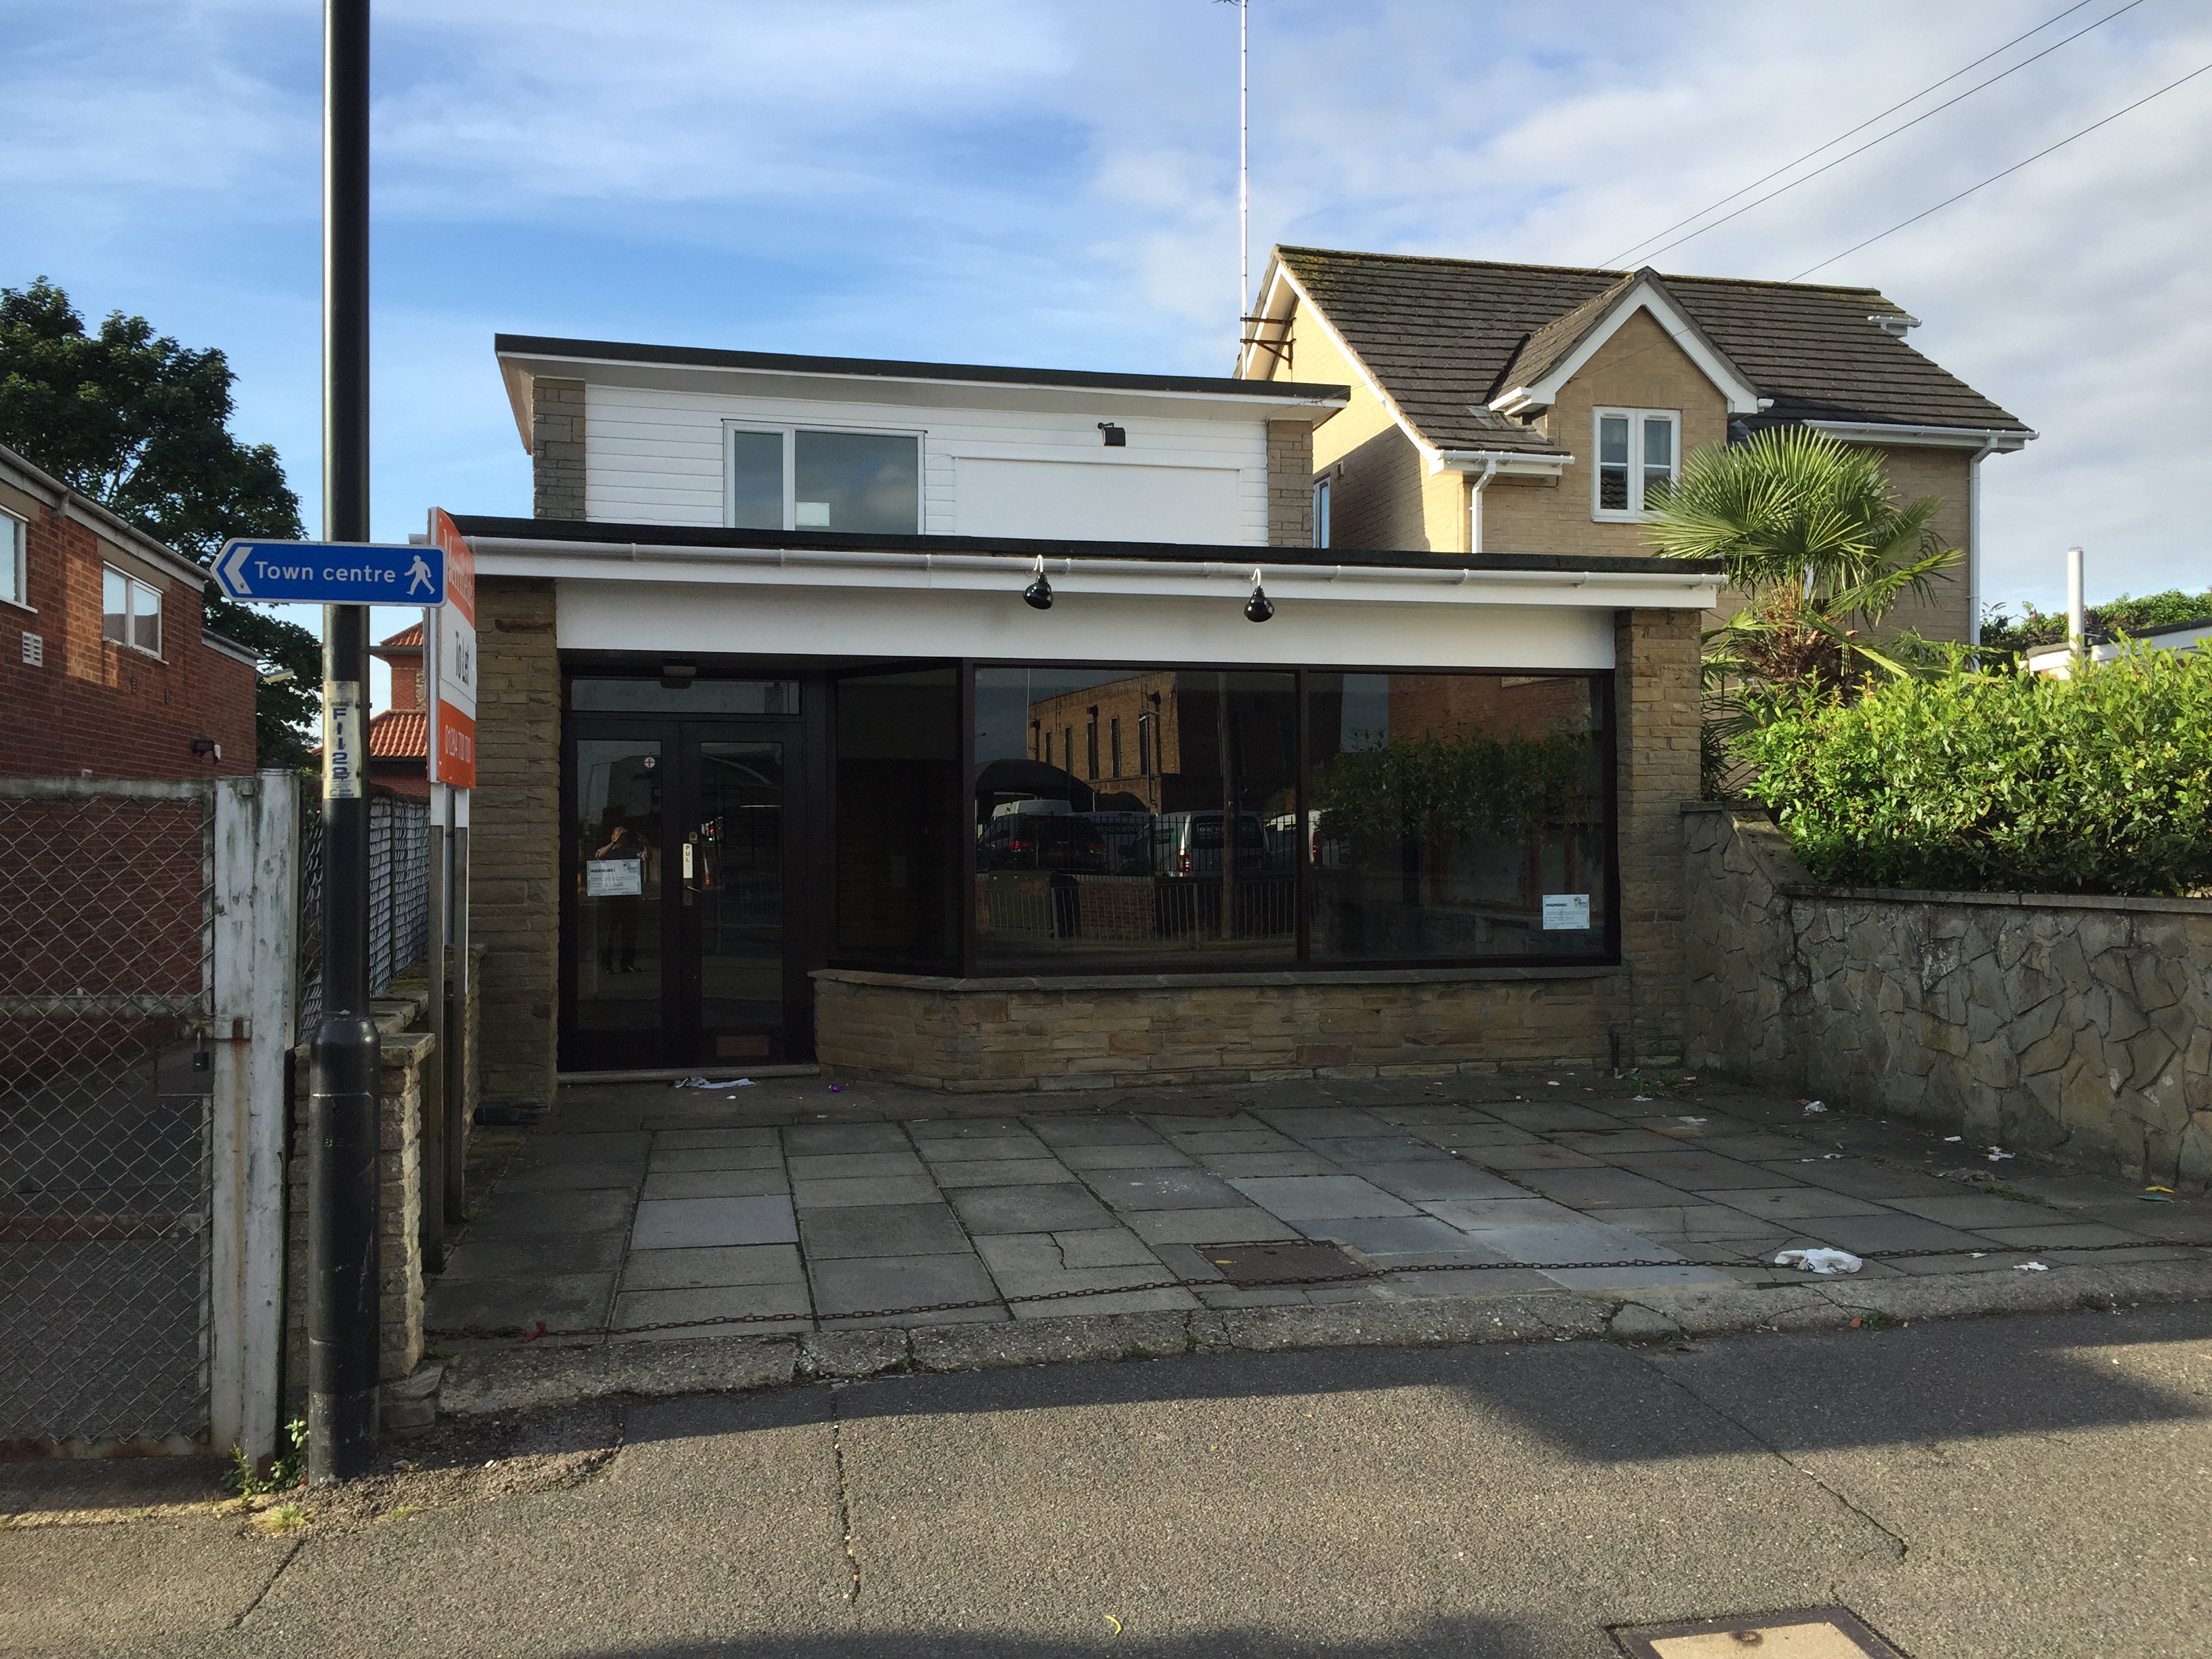 Edge of Town shop to let with parking